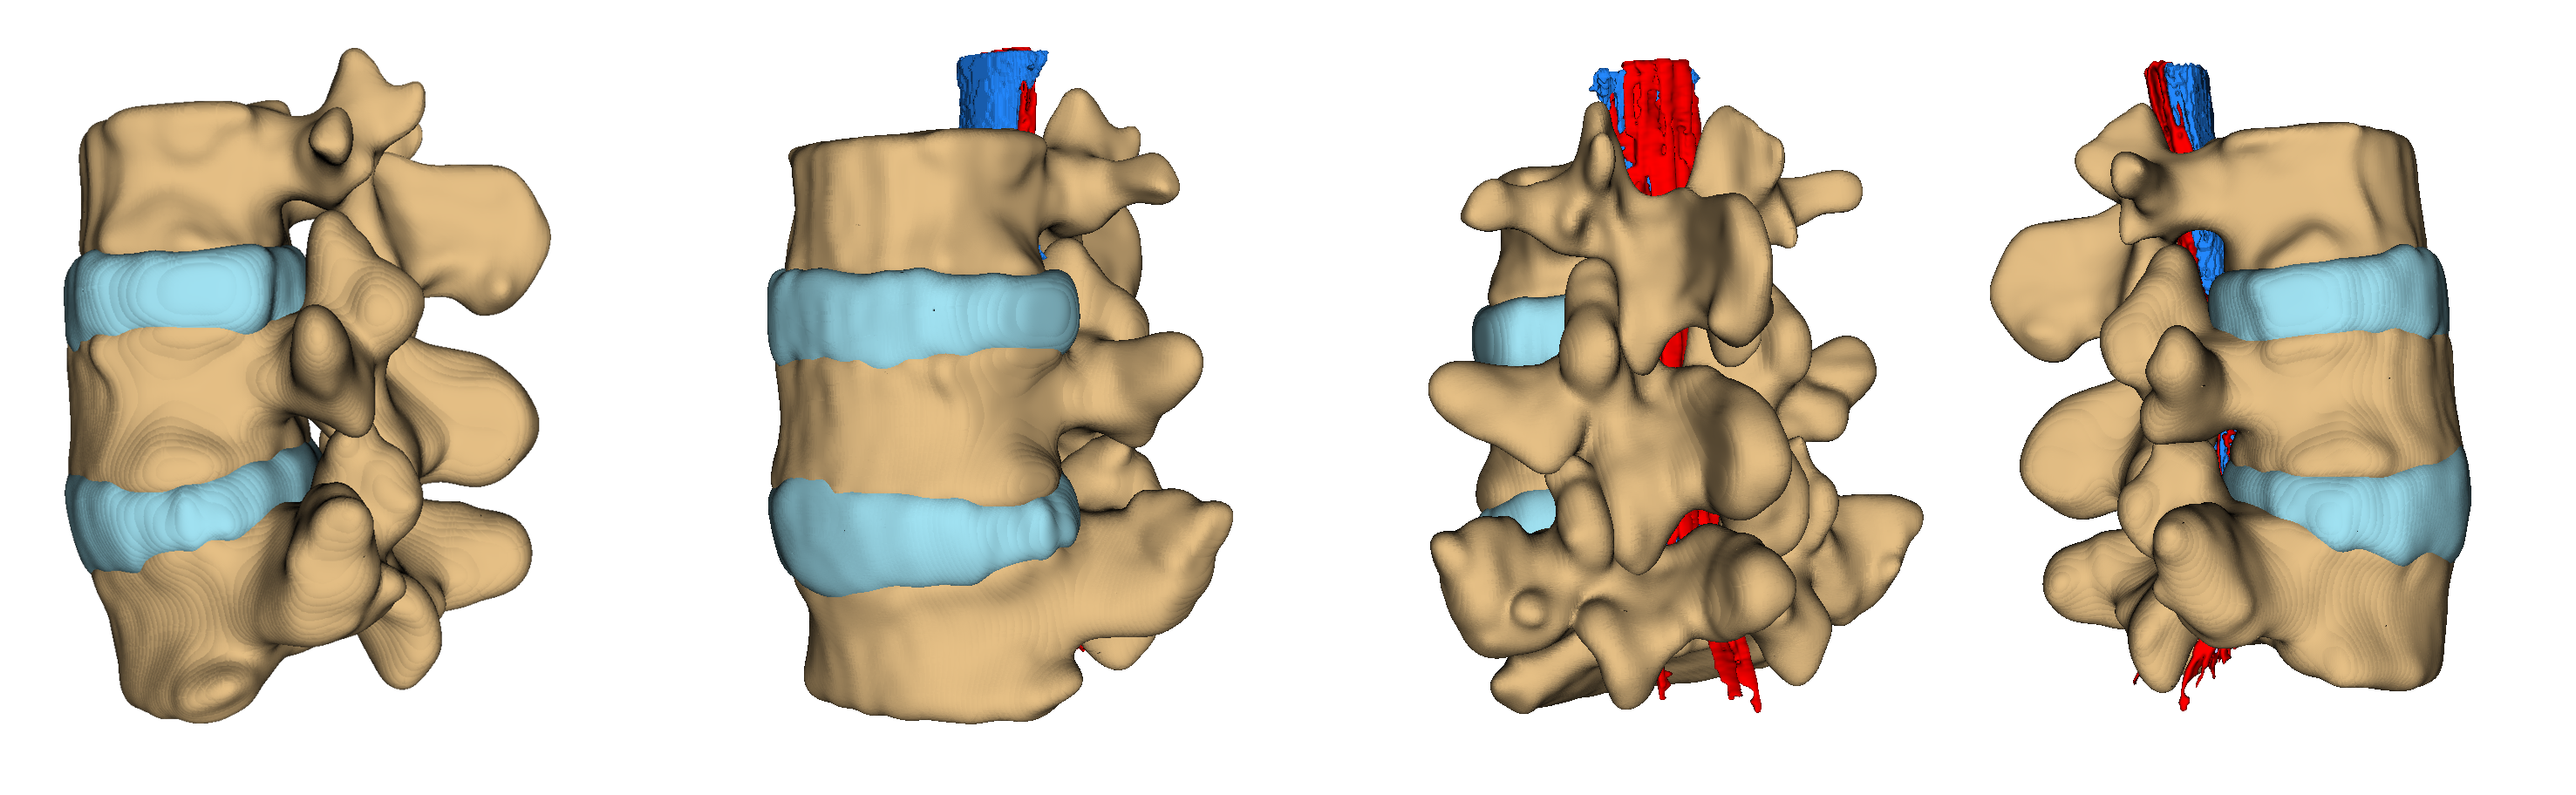 The cause of back pain is the pressure of the herniated disc onto the spinal nerves. This Slicer rendering shows an herniated disc pushing the canal for the cerebro-spinal fluid (CSF).